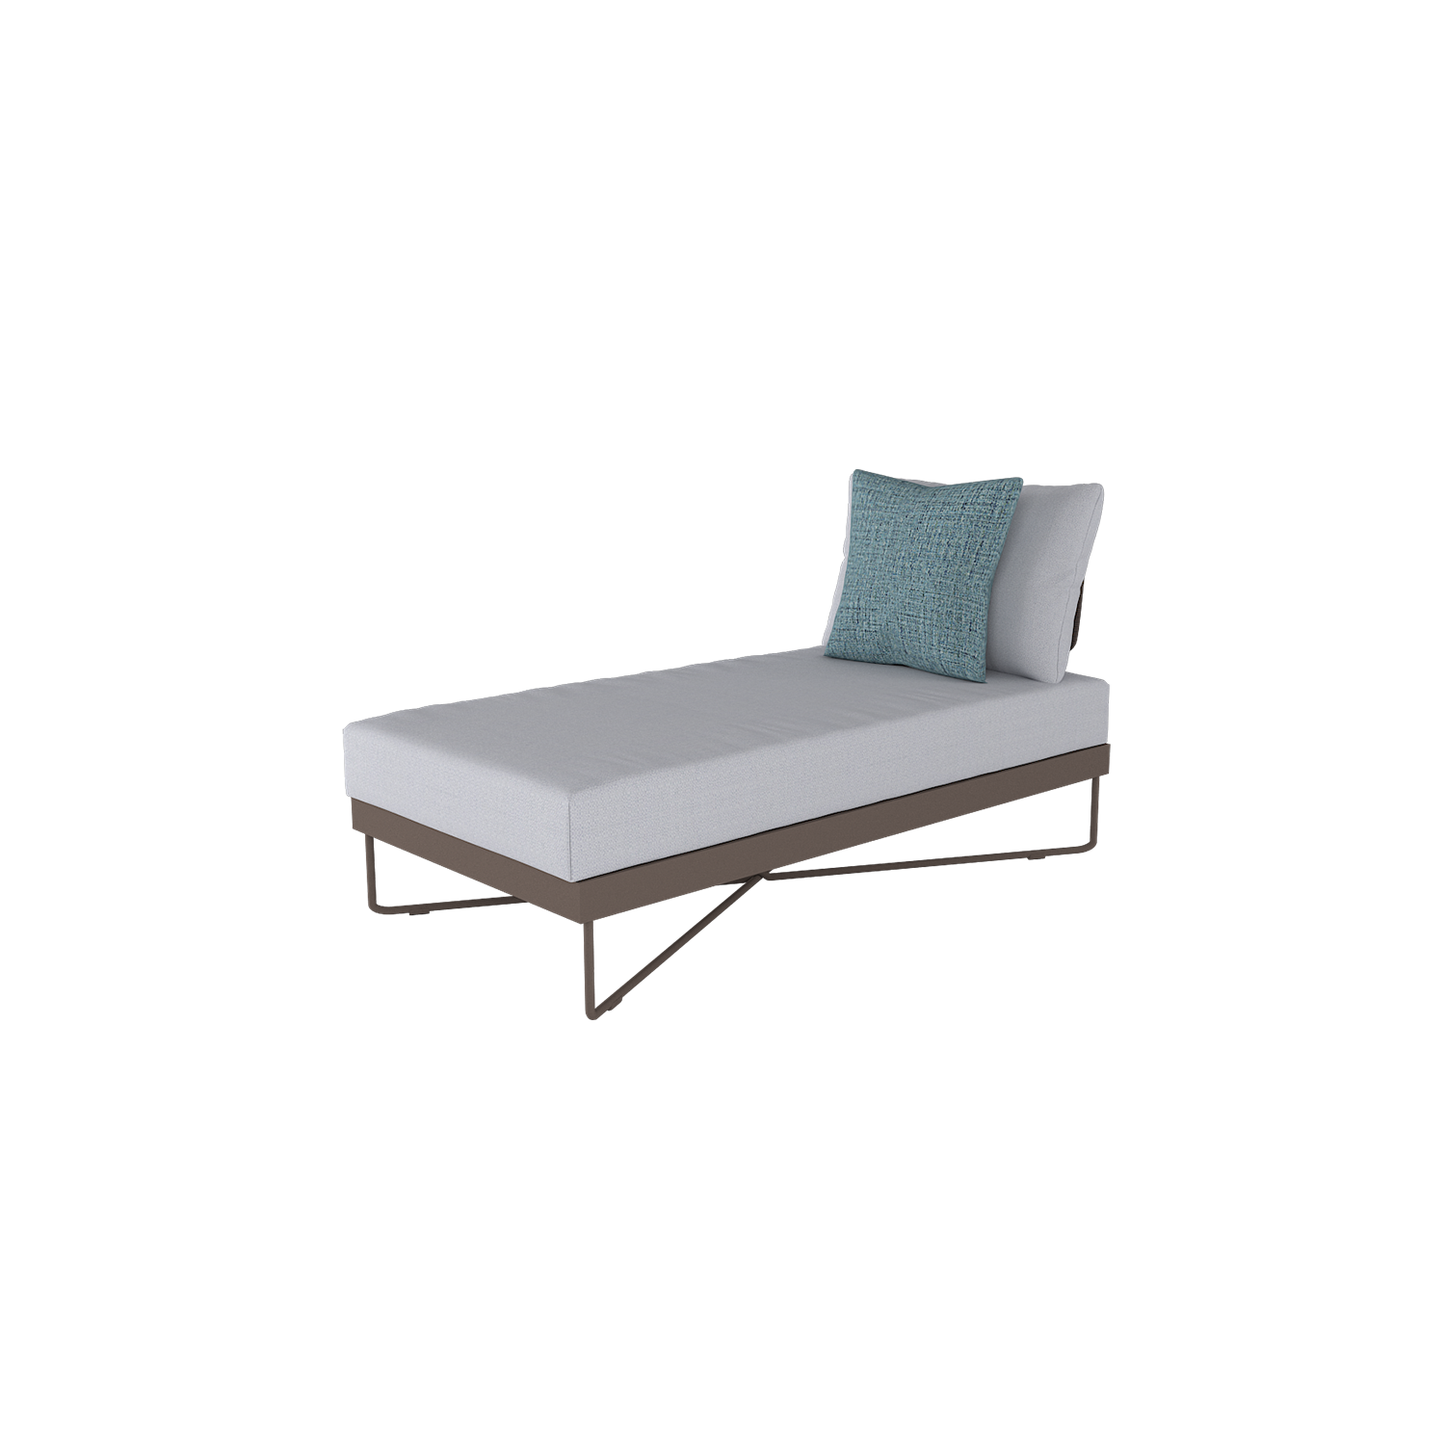 Coral Reef Chaise Lounge with Sunloom Back | Roberti | Outdoor Lounge chairs | coral-reef-lounge-chaise-lounge